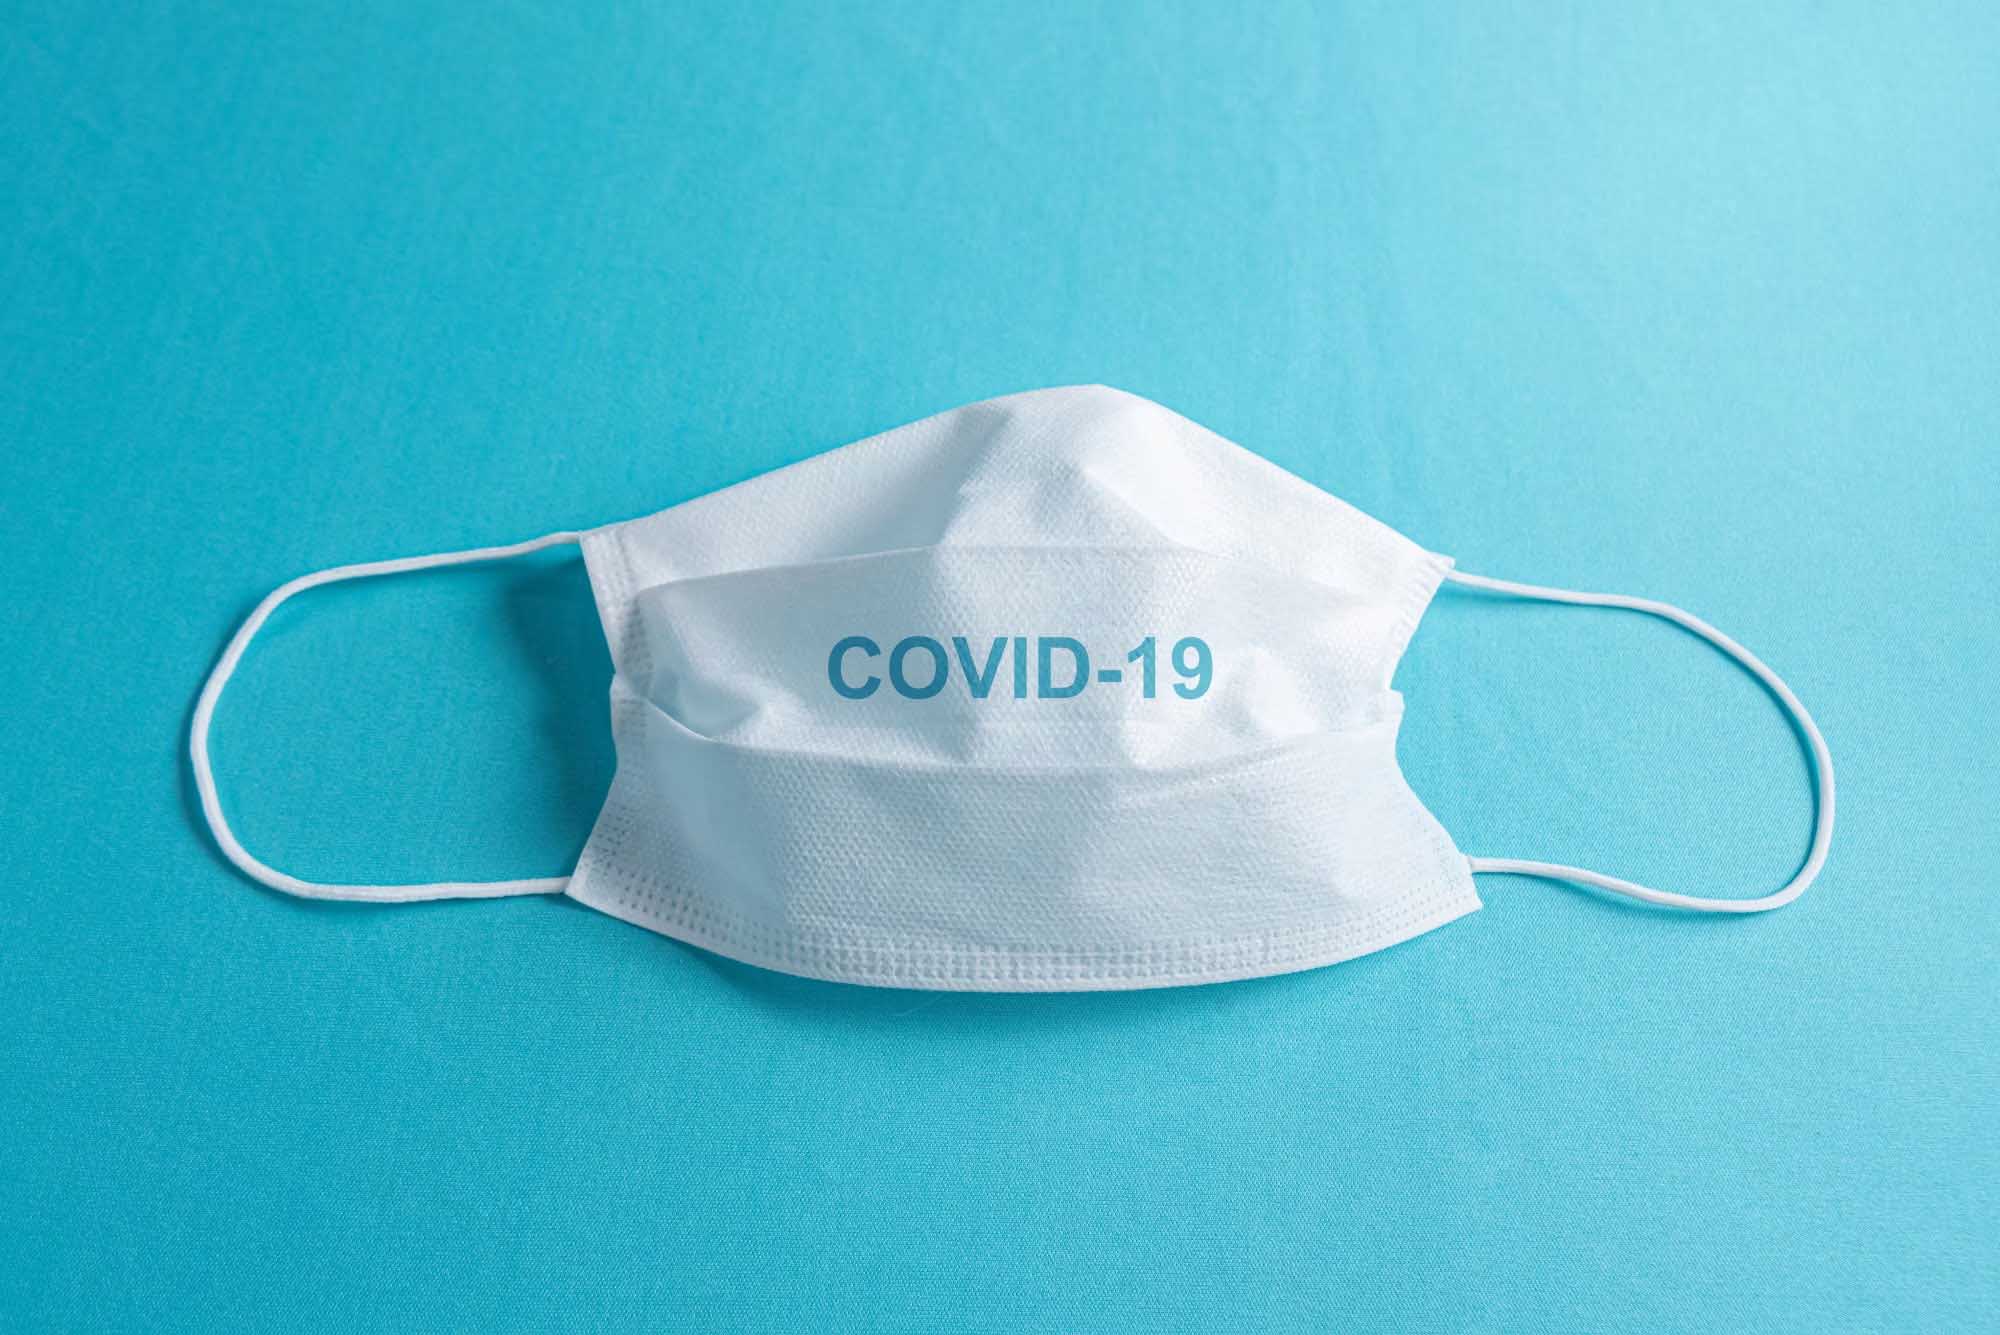 Managed Service transition during the COVID-19 pandemic